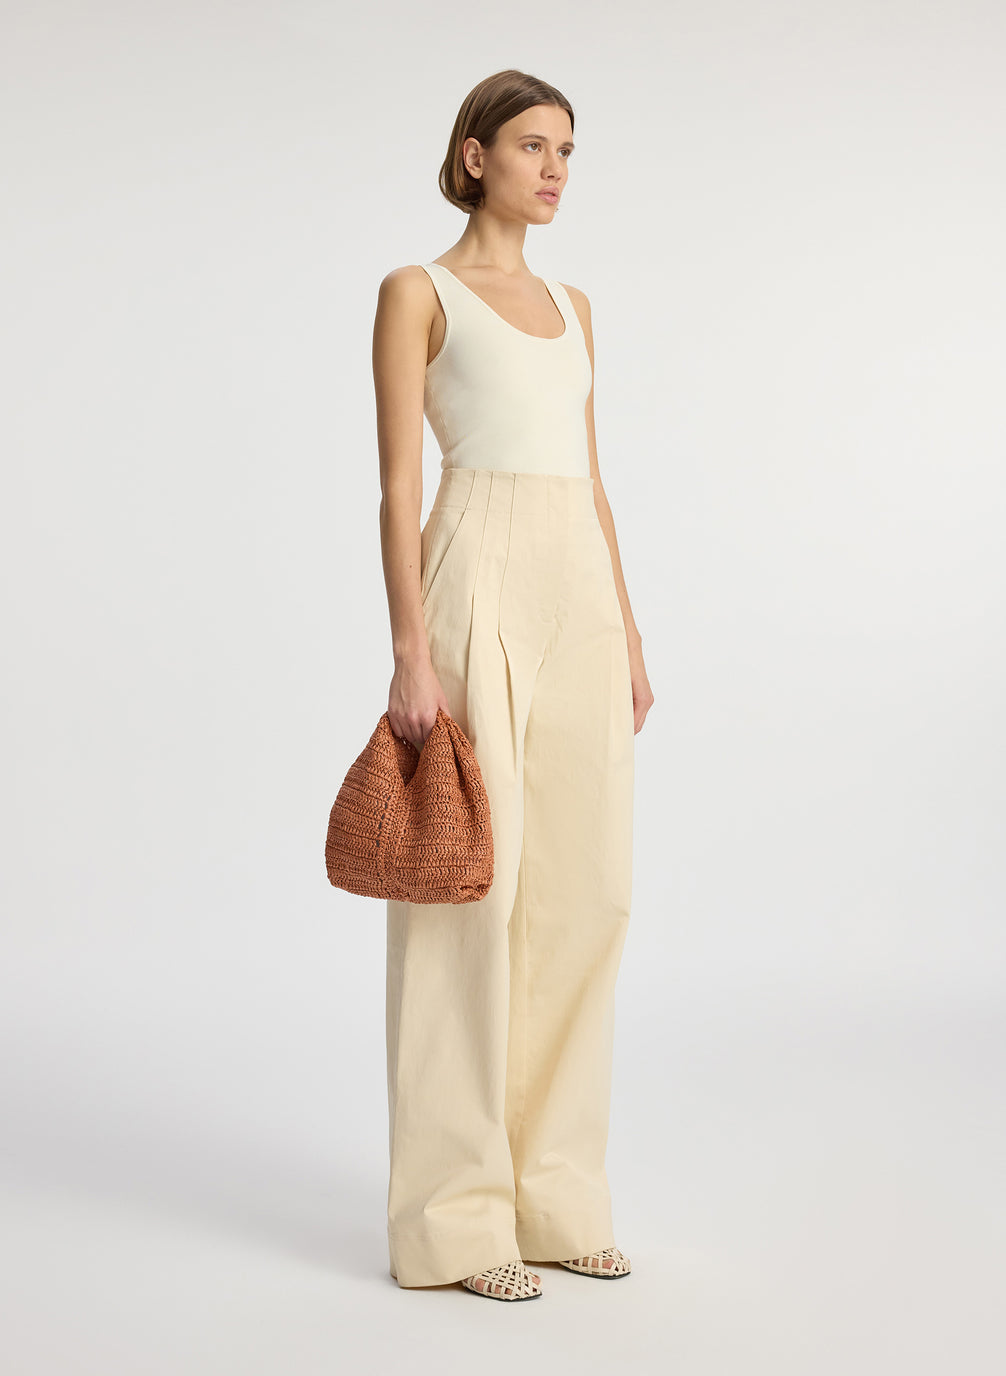 front view of woman wearing beige tank top and beige wide leg pants carrying small raffia woven handbag in brown